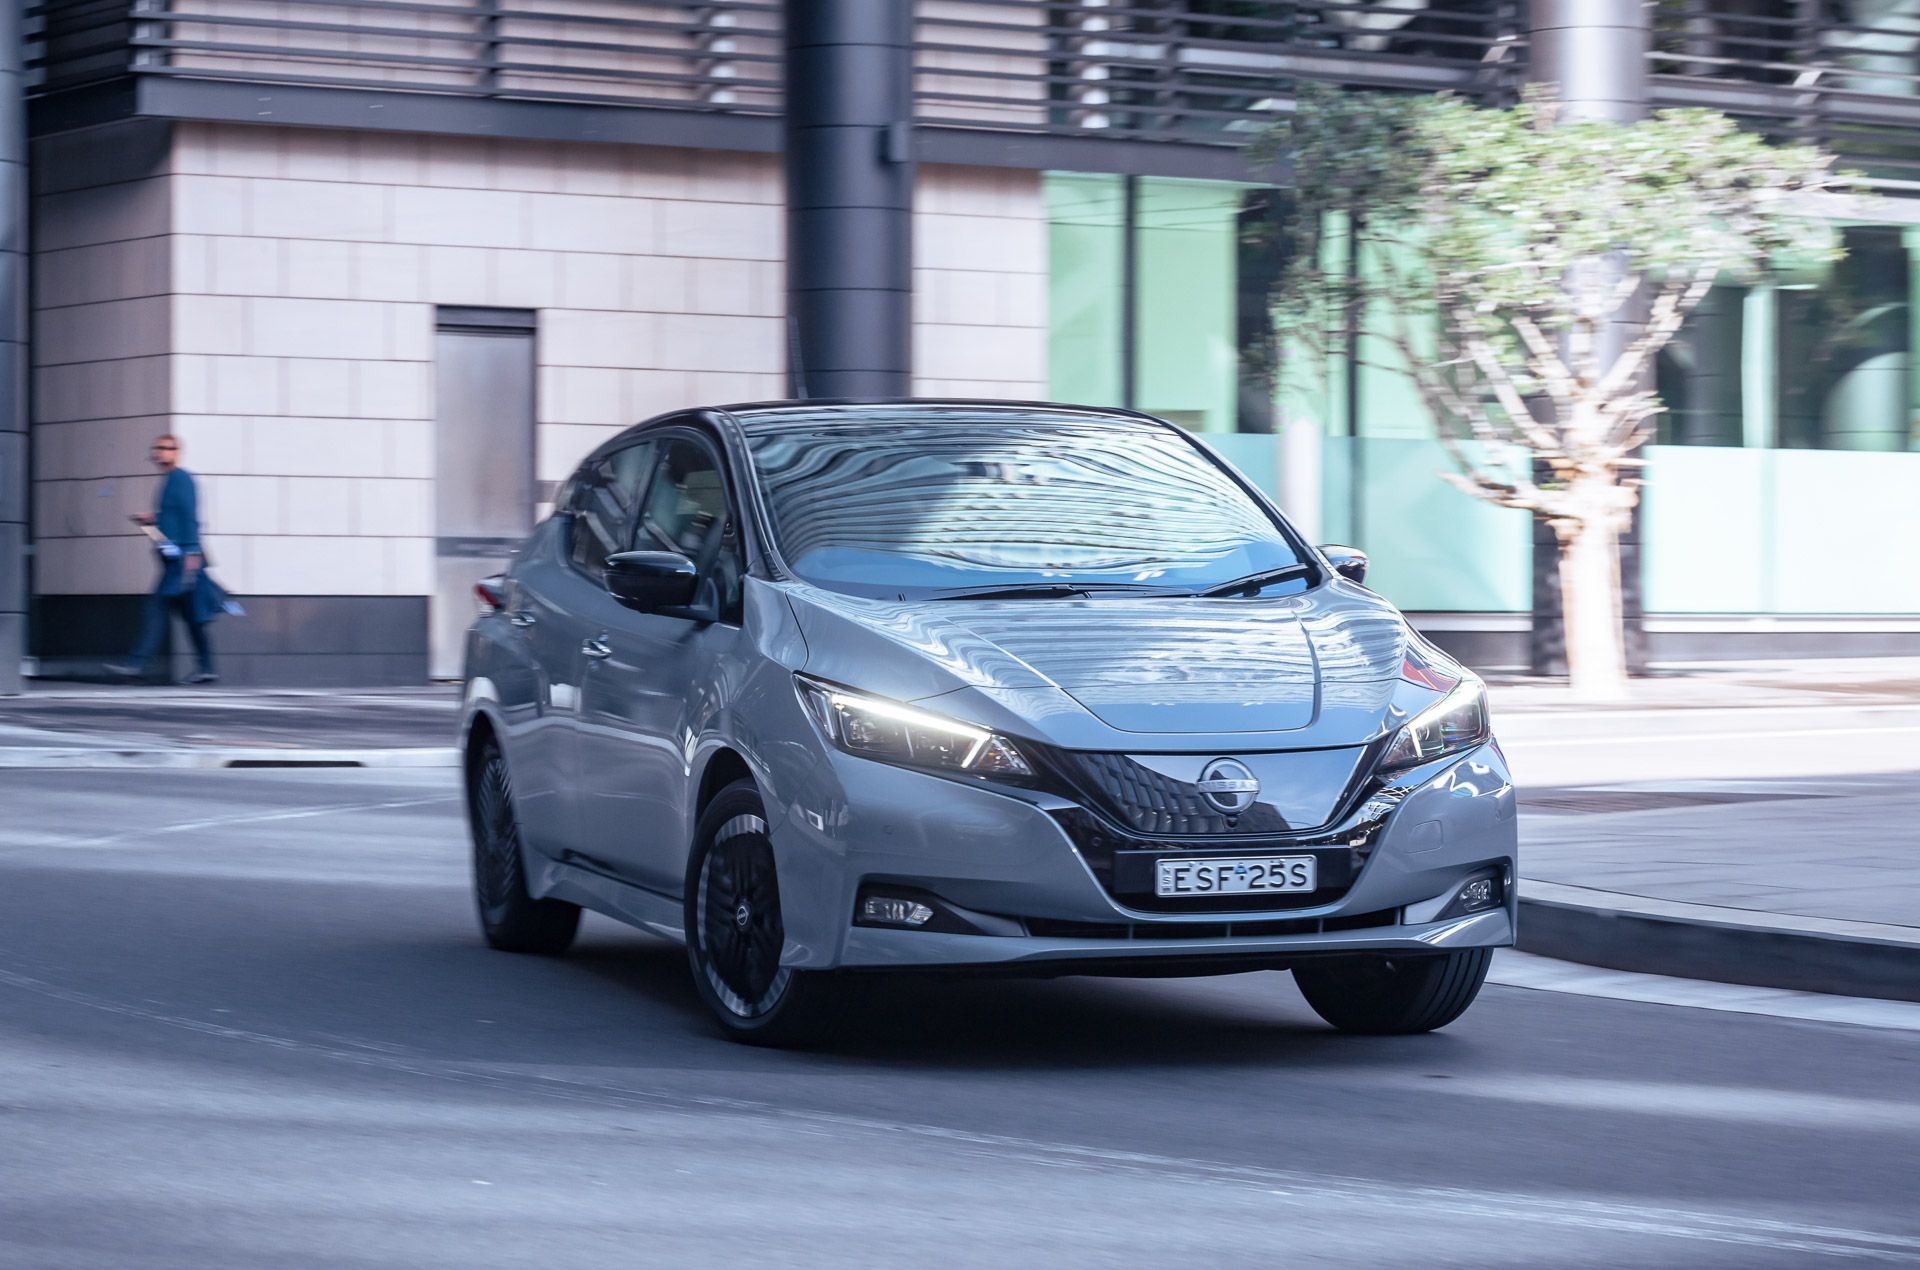 Grey 2023 Nissan Leaf driving in city